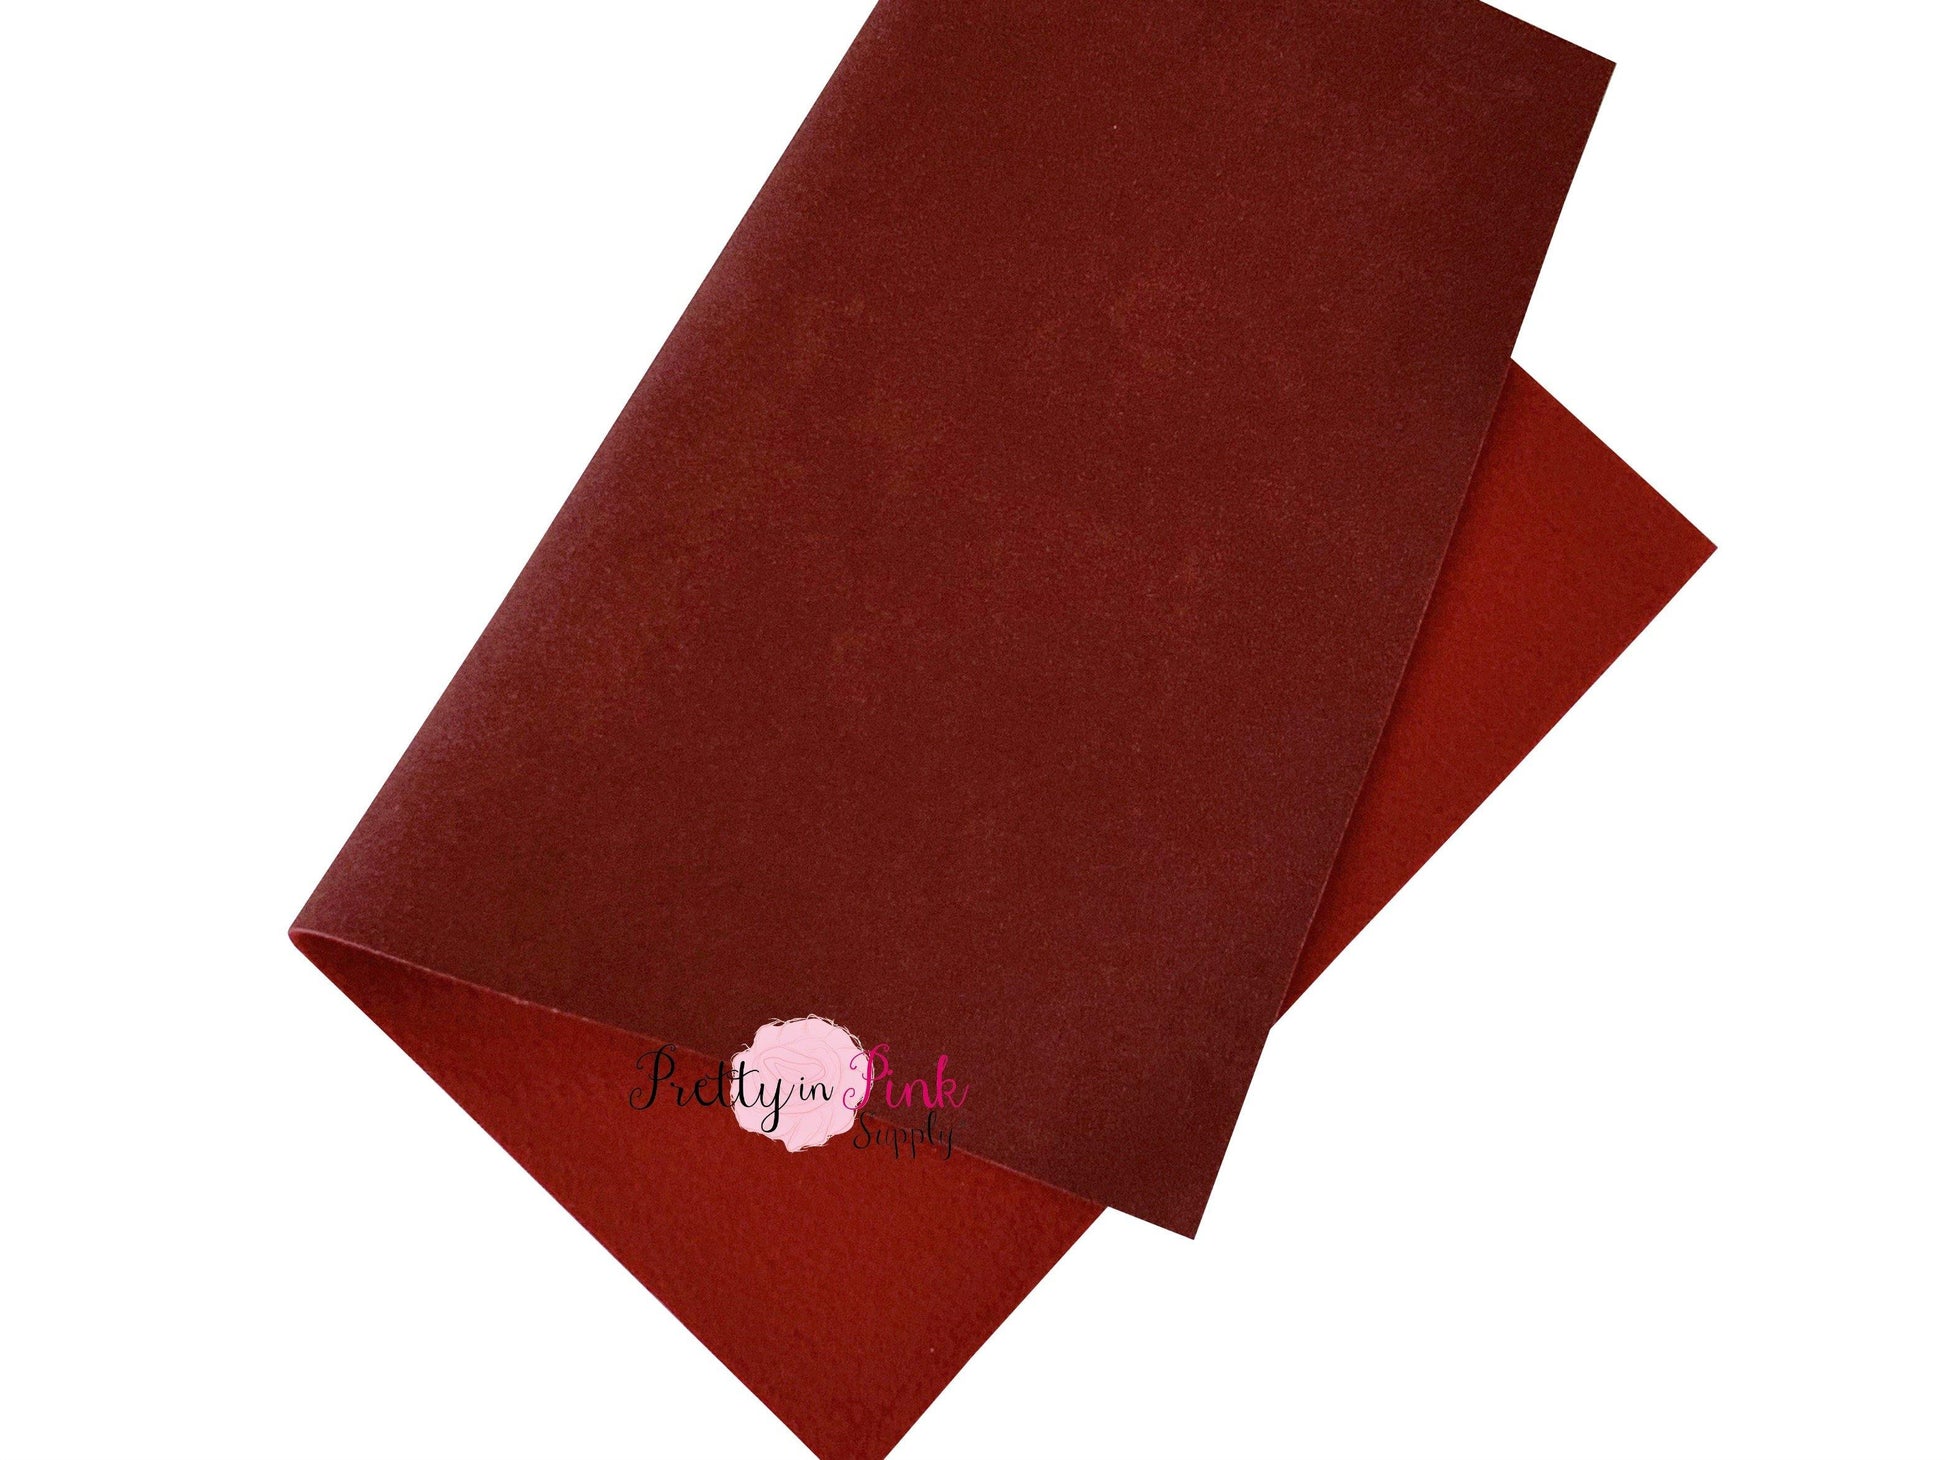 NEW Faux Suede Fabric Sheets - Pretty in Pink Supply